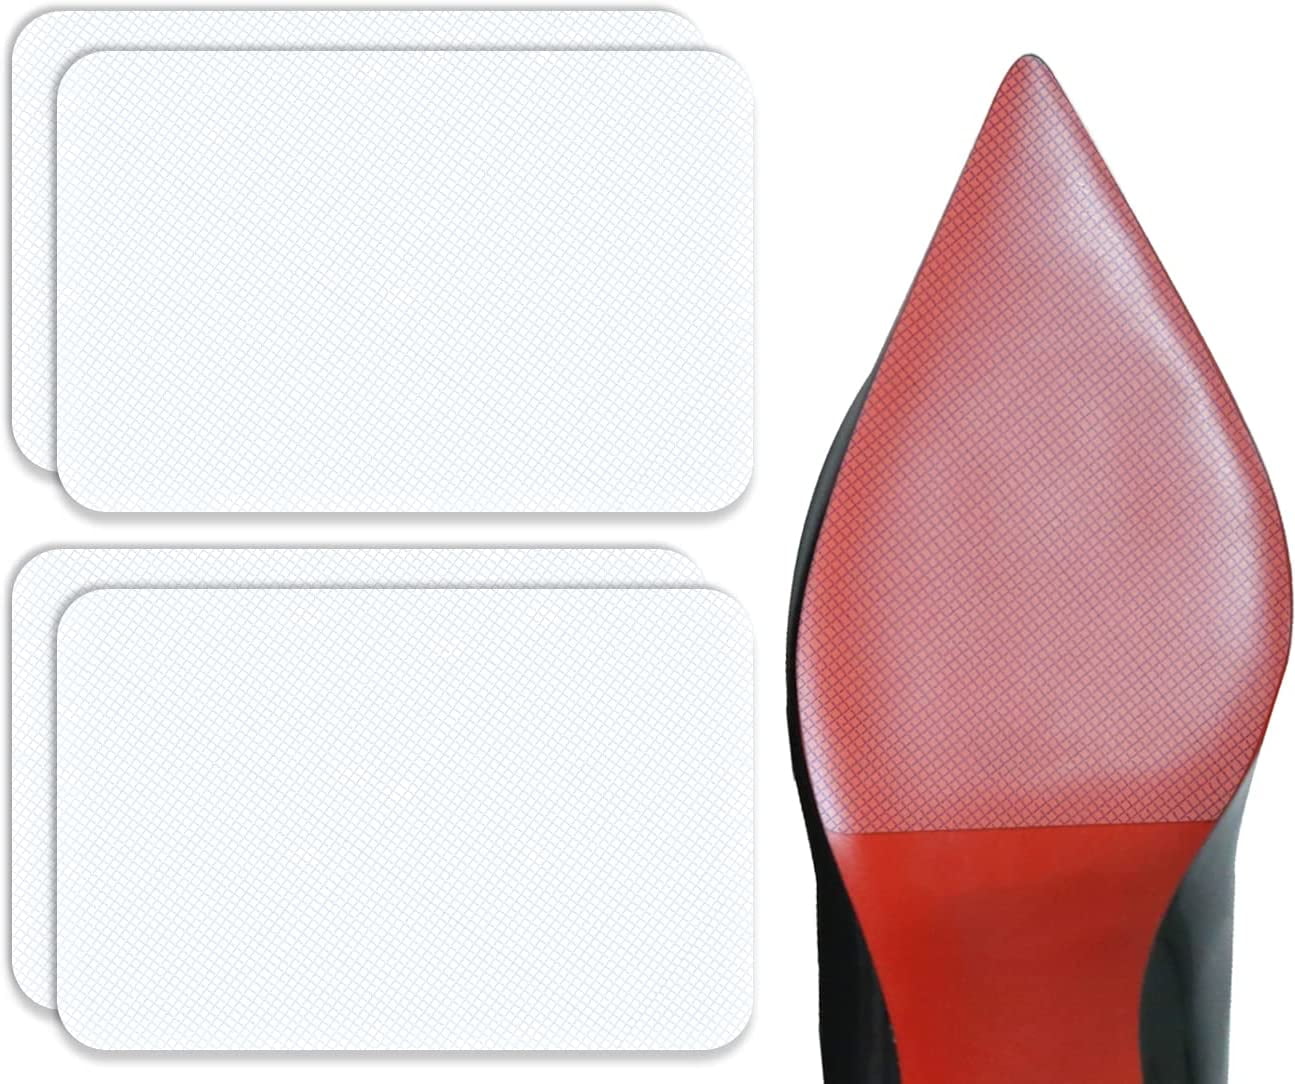 Shoe Sole Protectors for Christian Louboutin Heels, Red Silicone